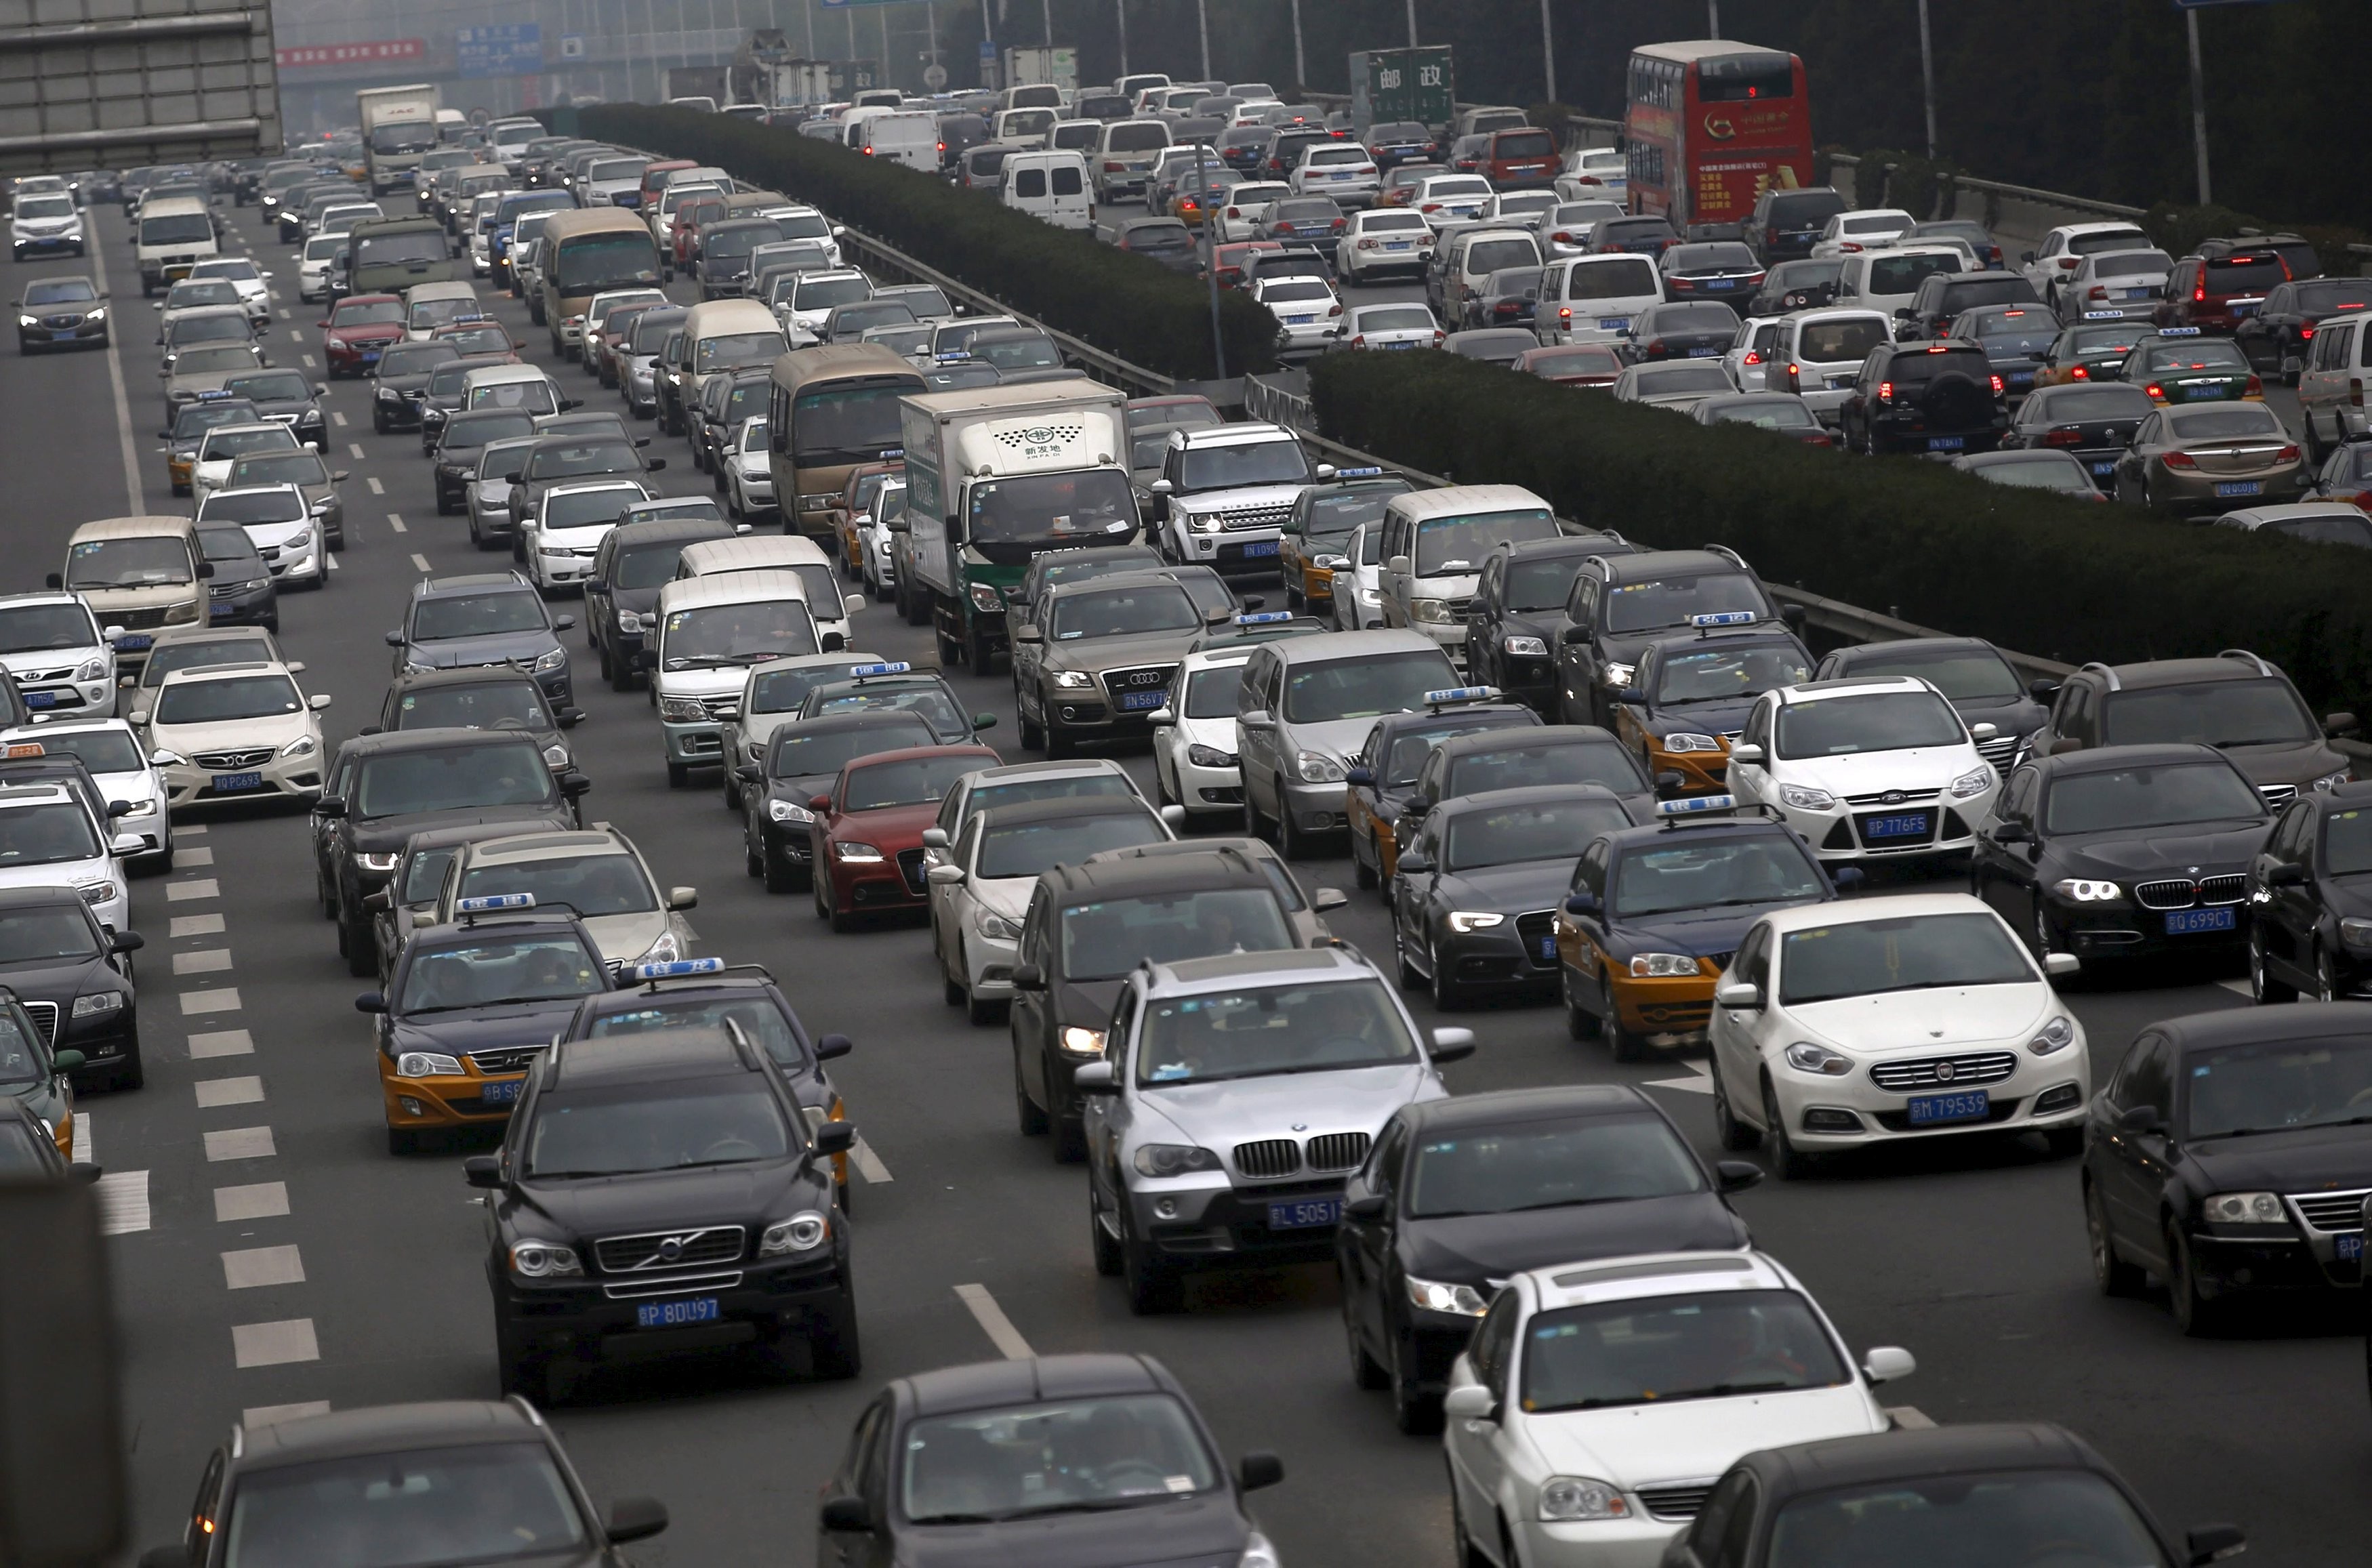 The Chinese central government expects factory output to hit 30 million cars by 2020 and 35 million by 2025. Photo: Reuters